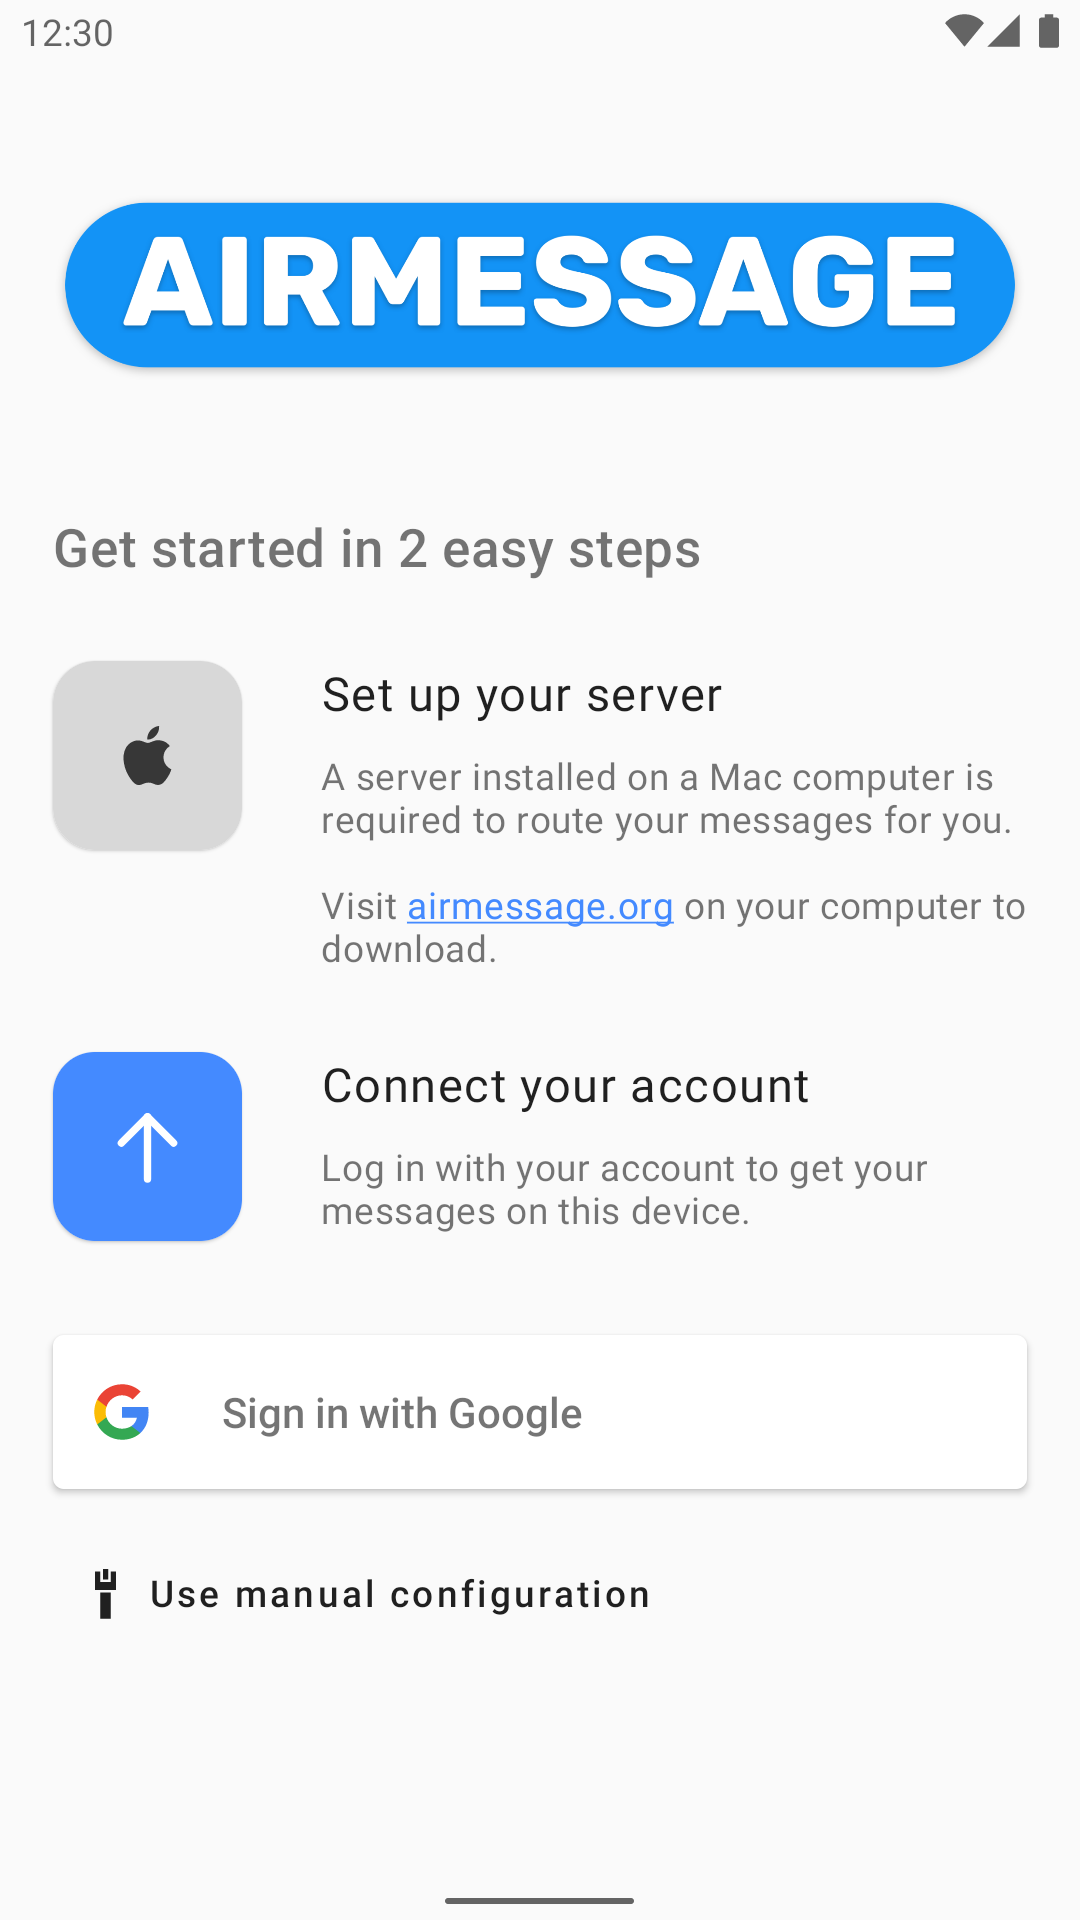 AirMessage for Android's new onboarding screen